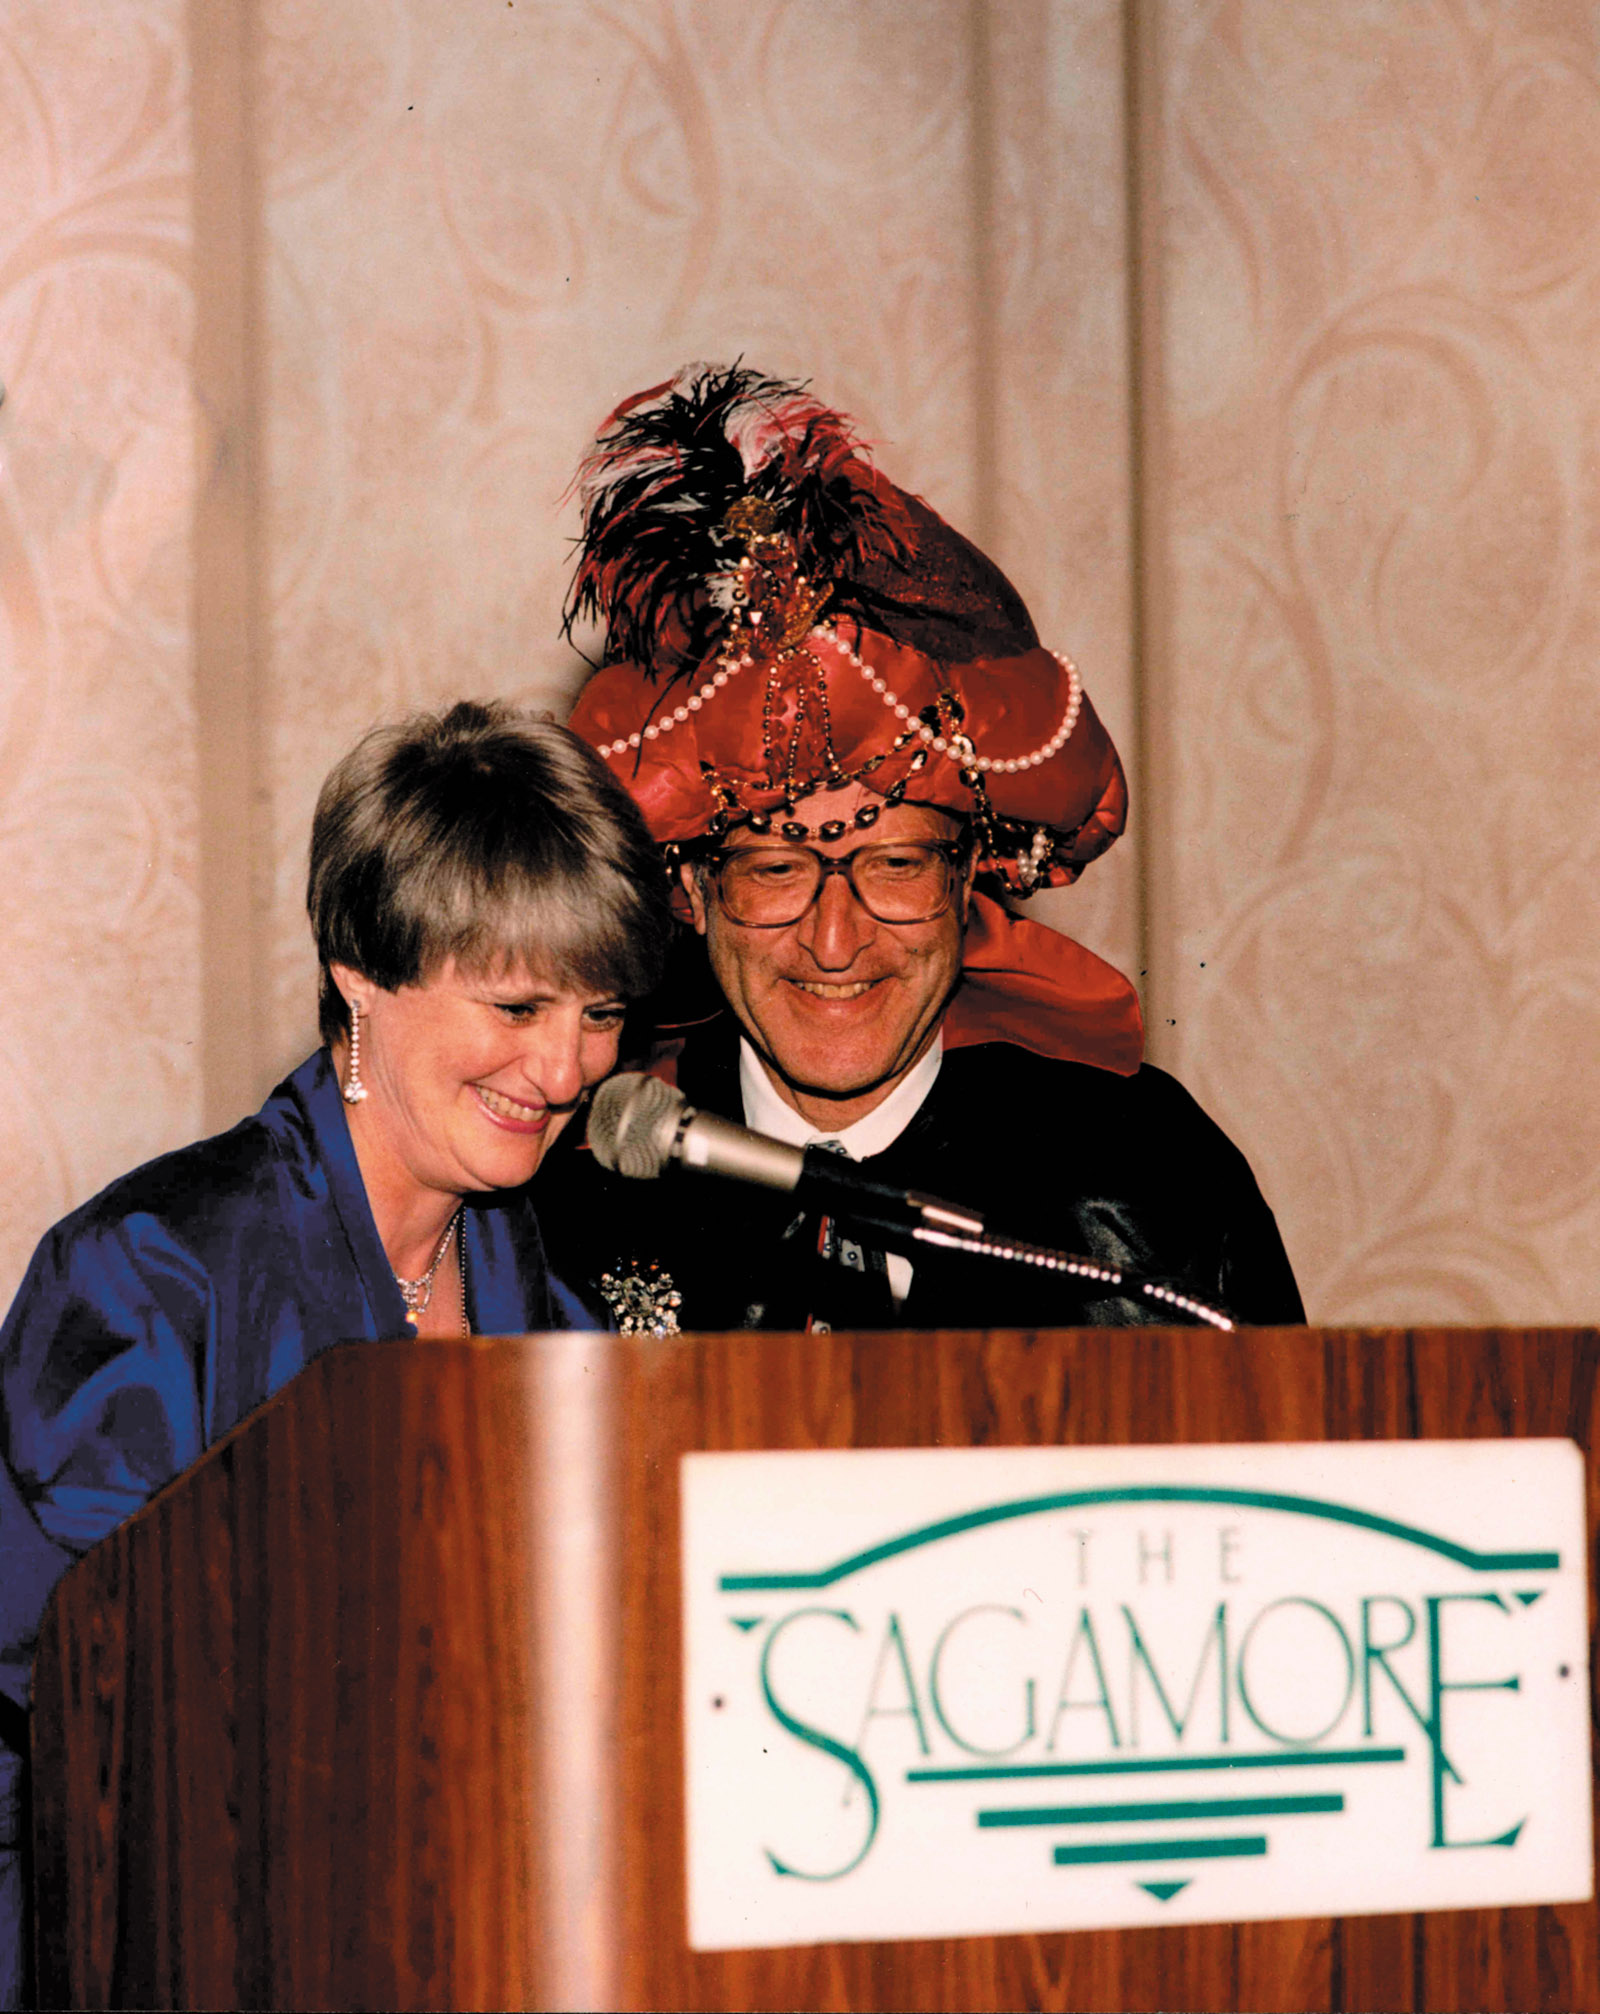 Judges Jon O. Newman and Denise Cote at the Second Circuit Judicial Conference in 1997, with Judge Newman impersonating Carnac the Magnificent, the character created by Johnny Carson on The Tonight Show